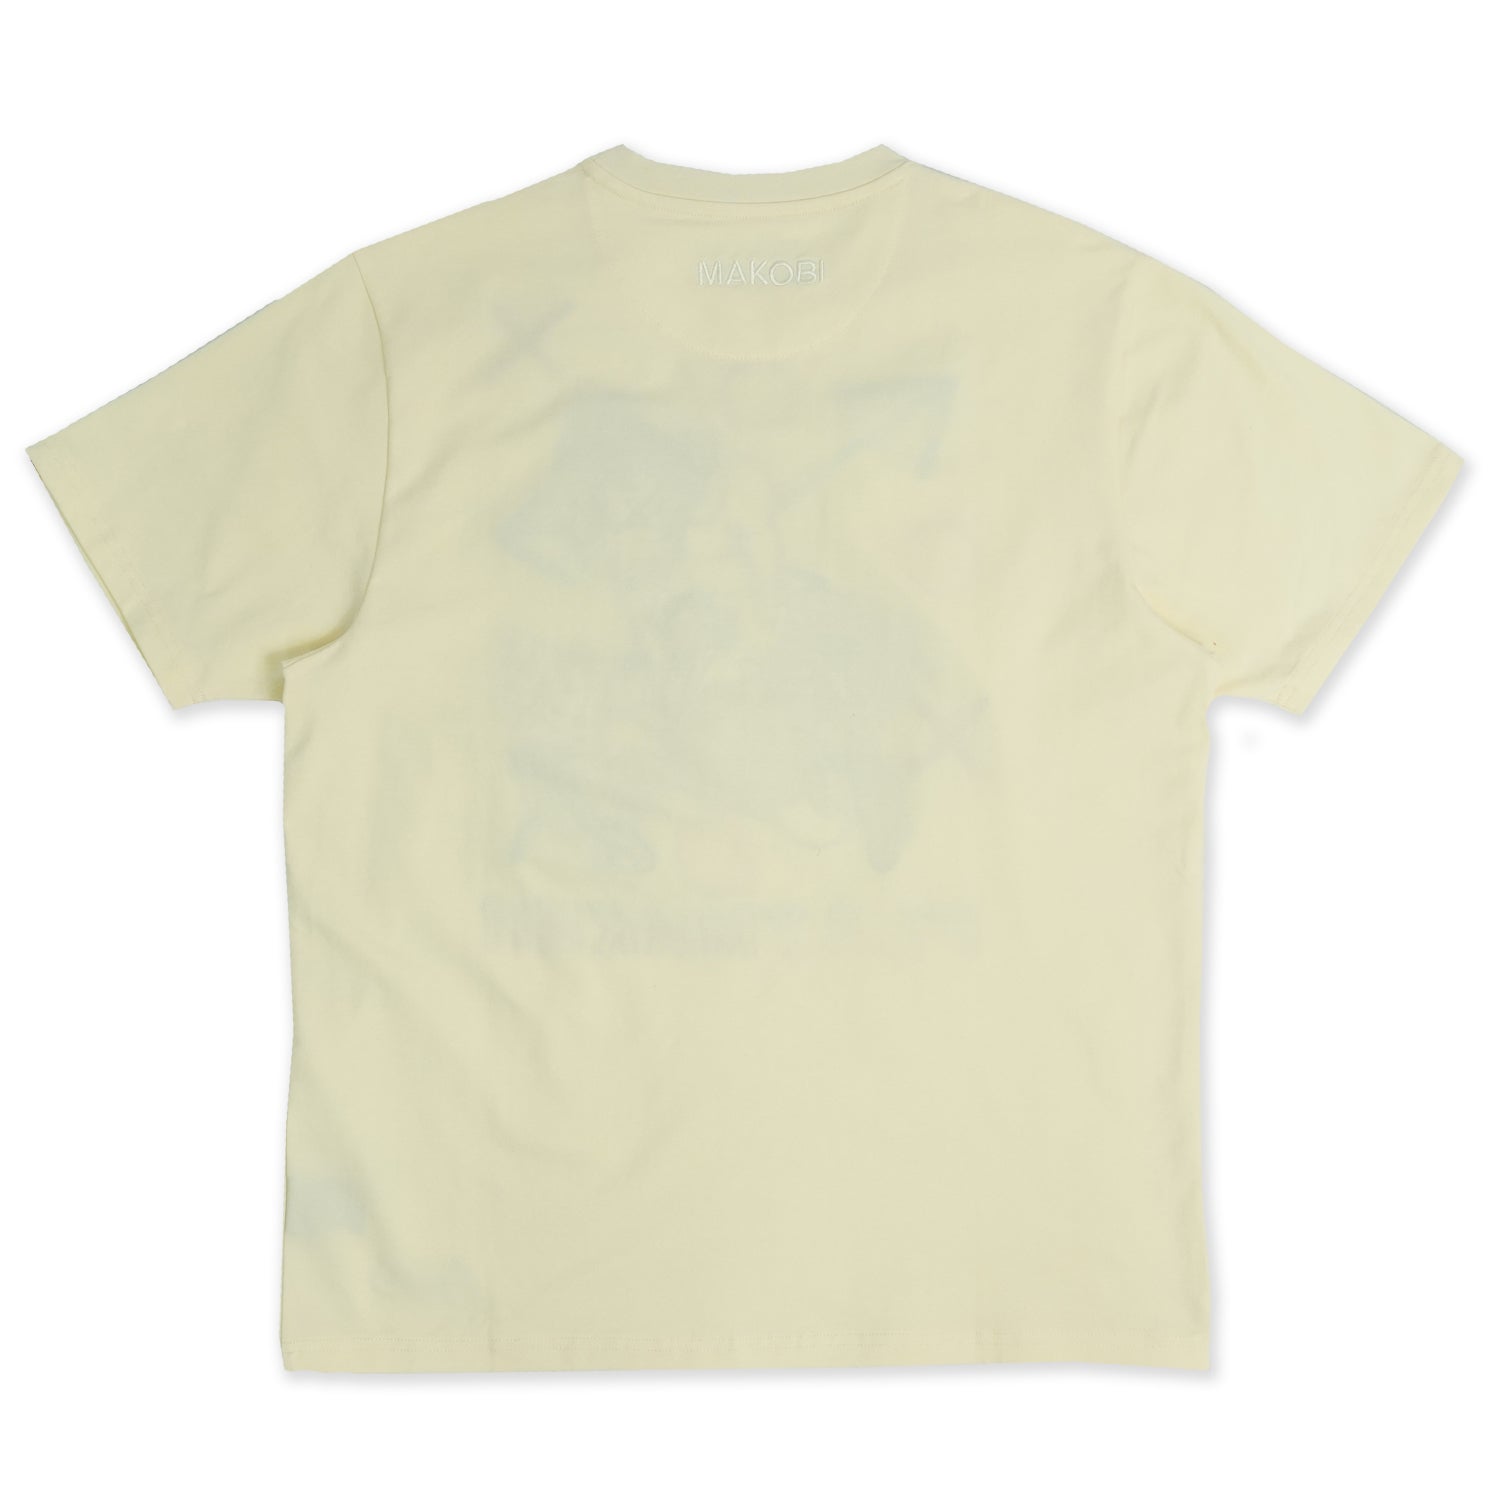 M157 Playmaker Tee - Natural